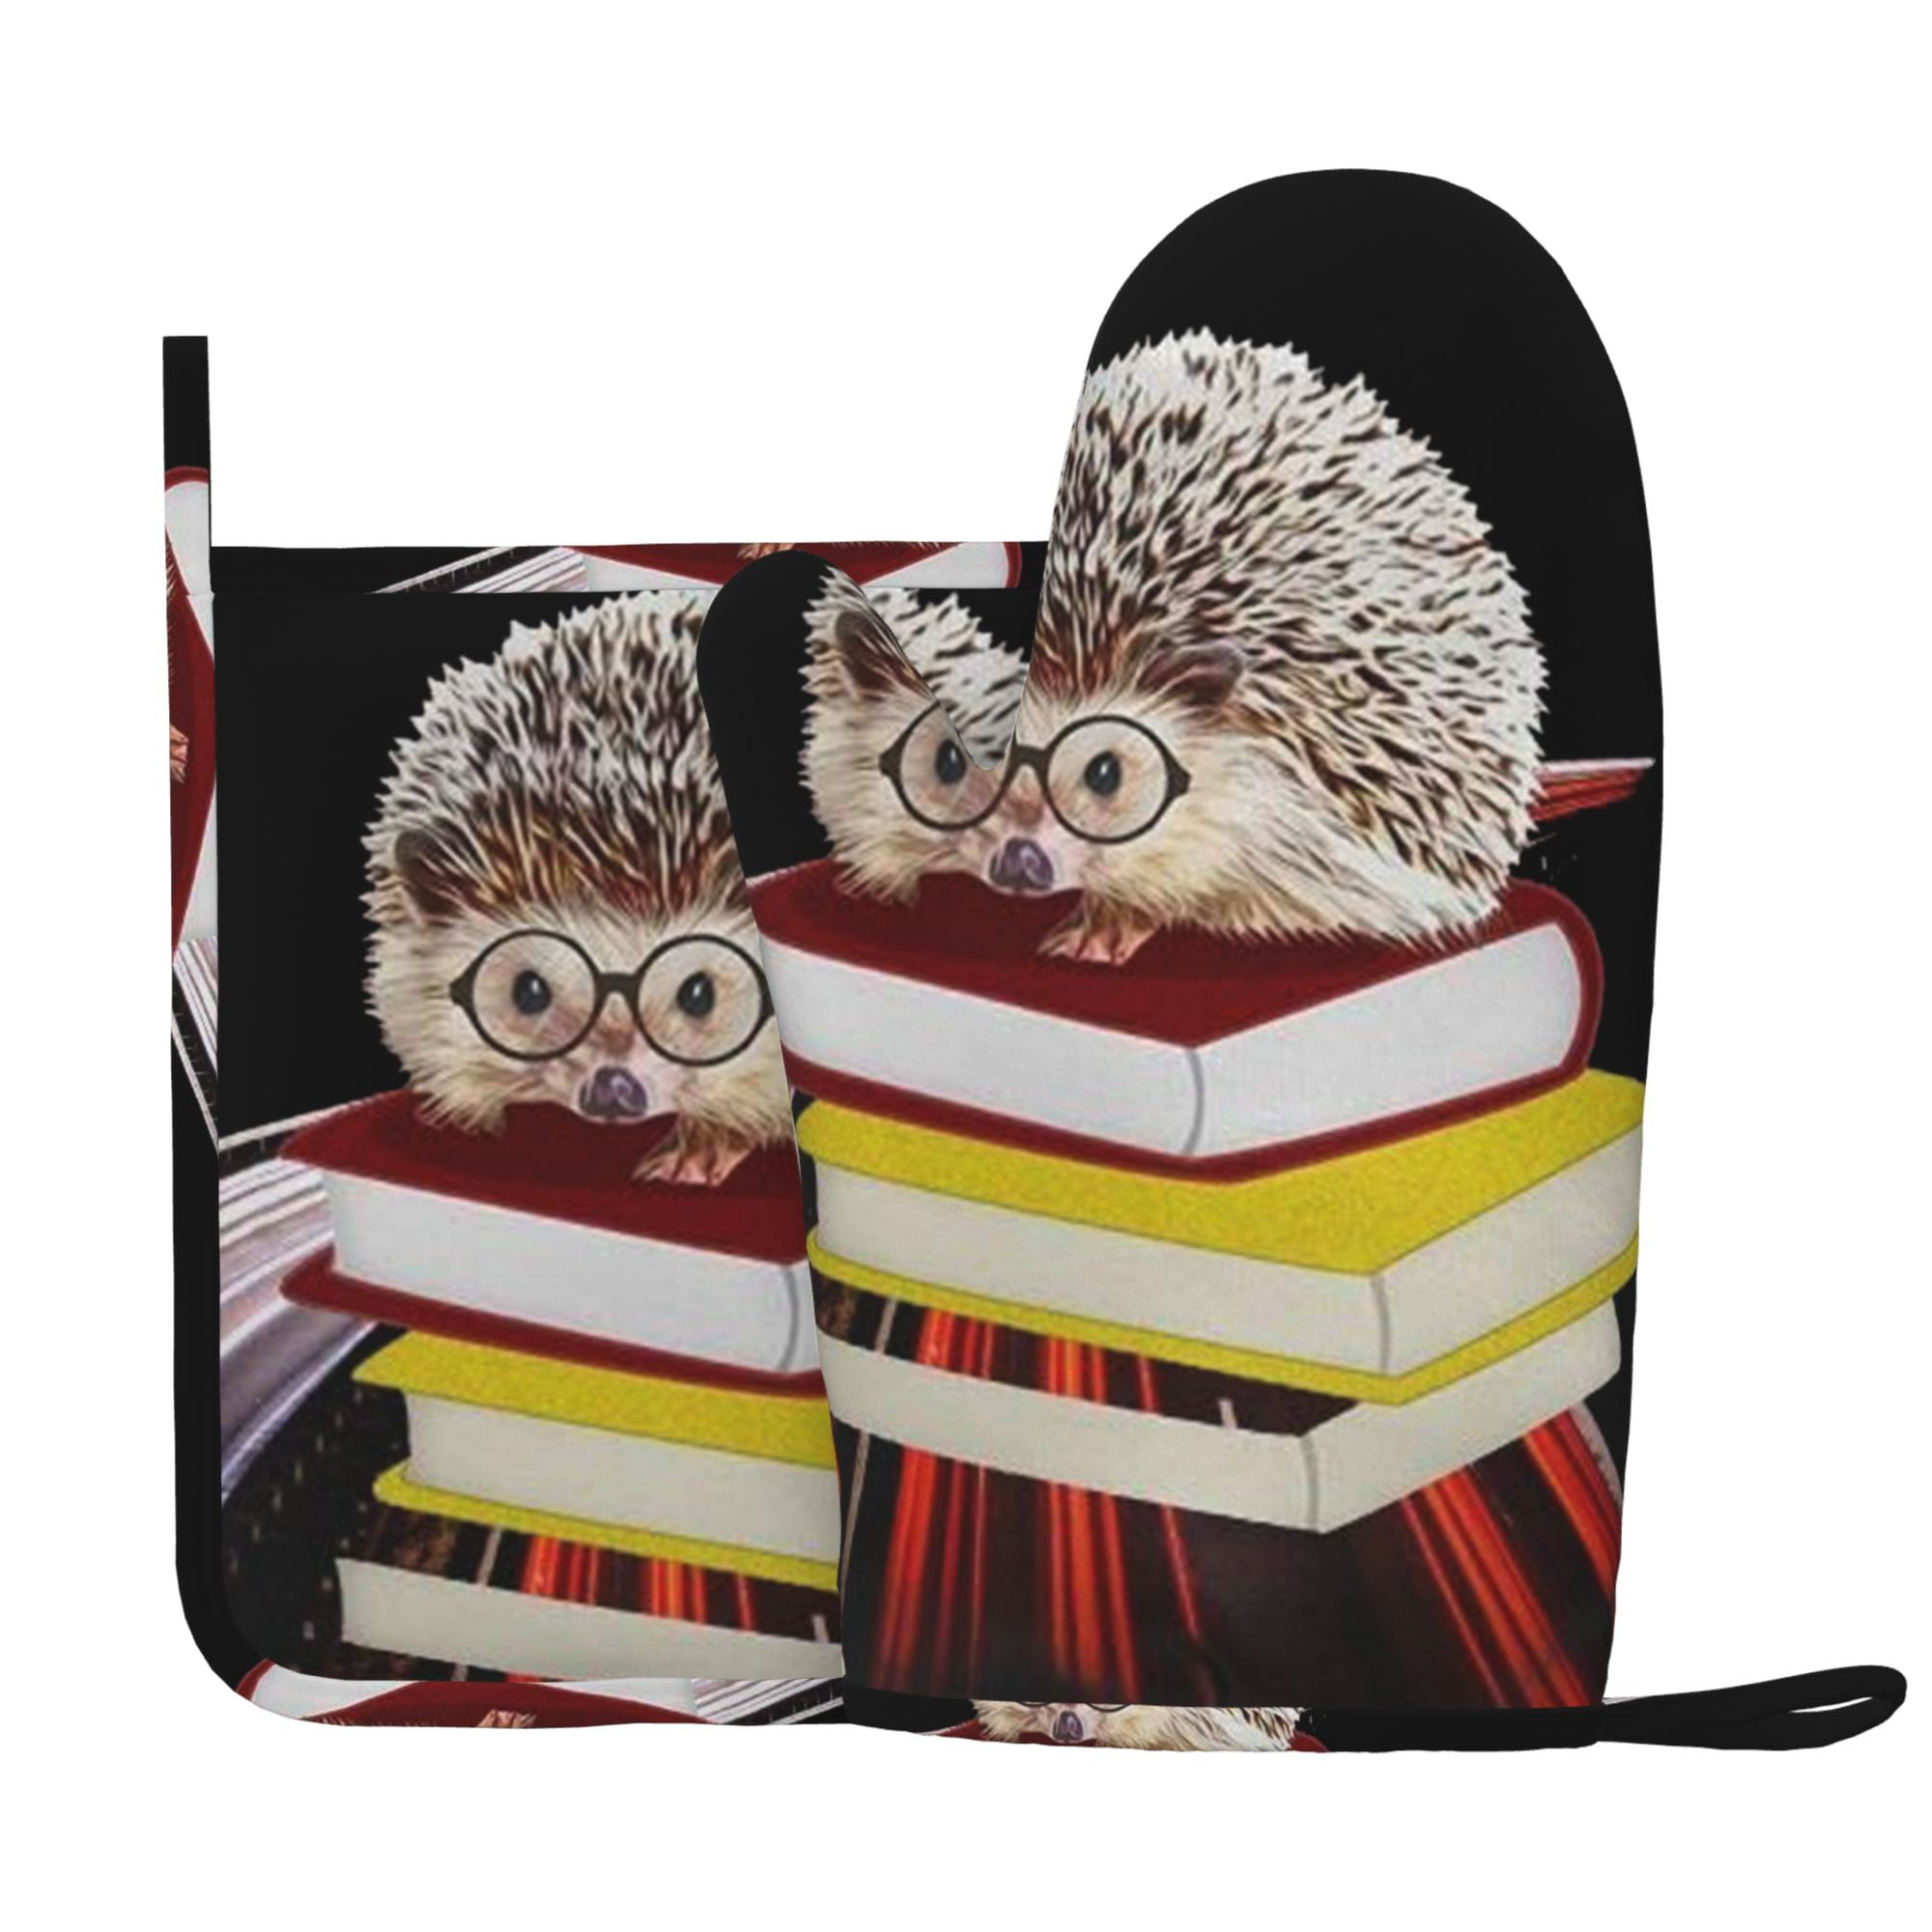 Adorable Hedgehog Book Oven Mitts Pot Holders Set Non-Slip Cooking Kitchen Gloves Washable Heat Resistant Oven Gloves for Microwave BBQ Baking